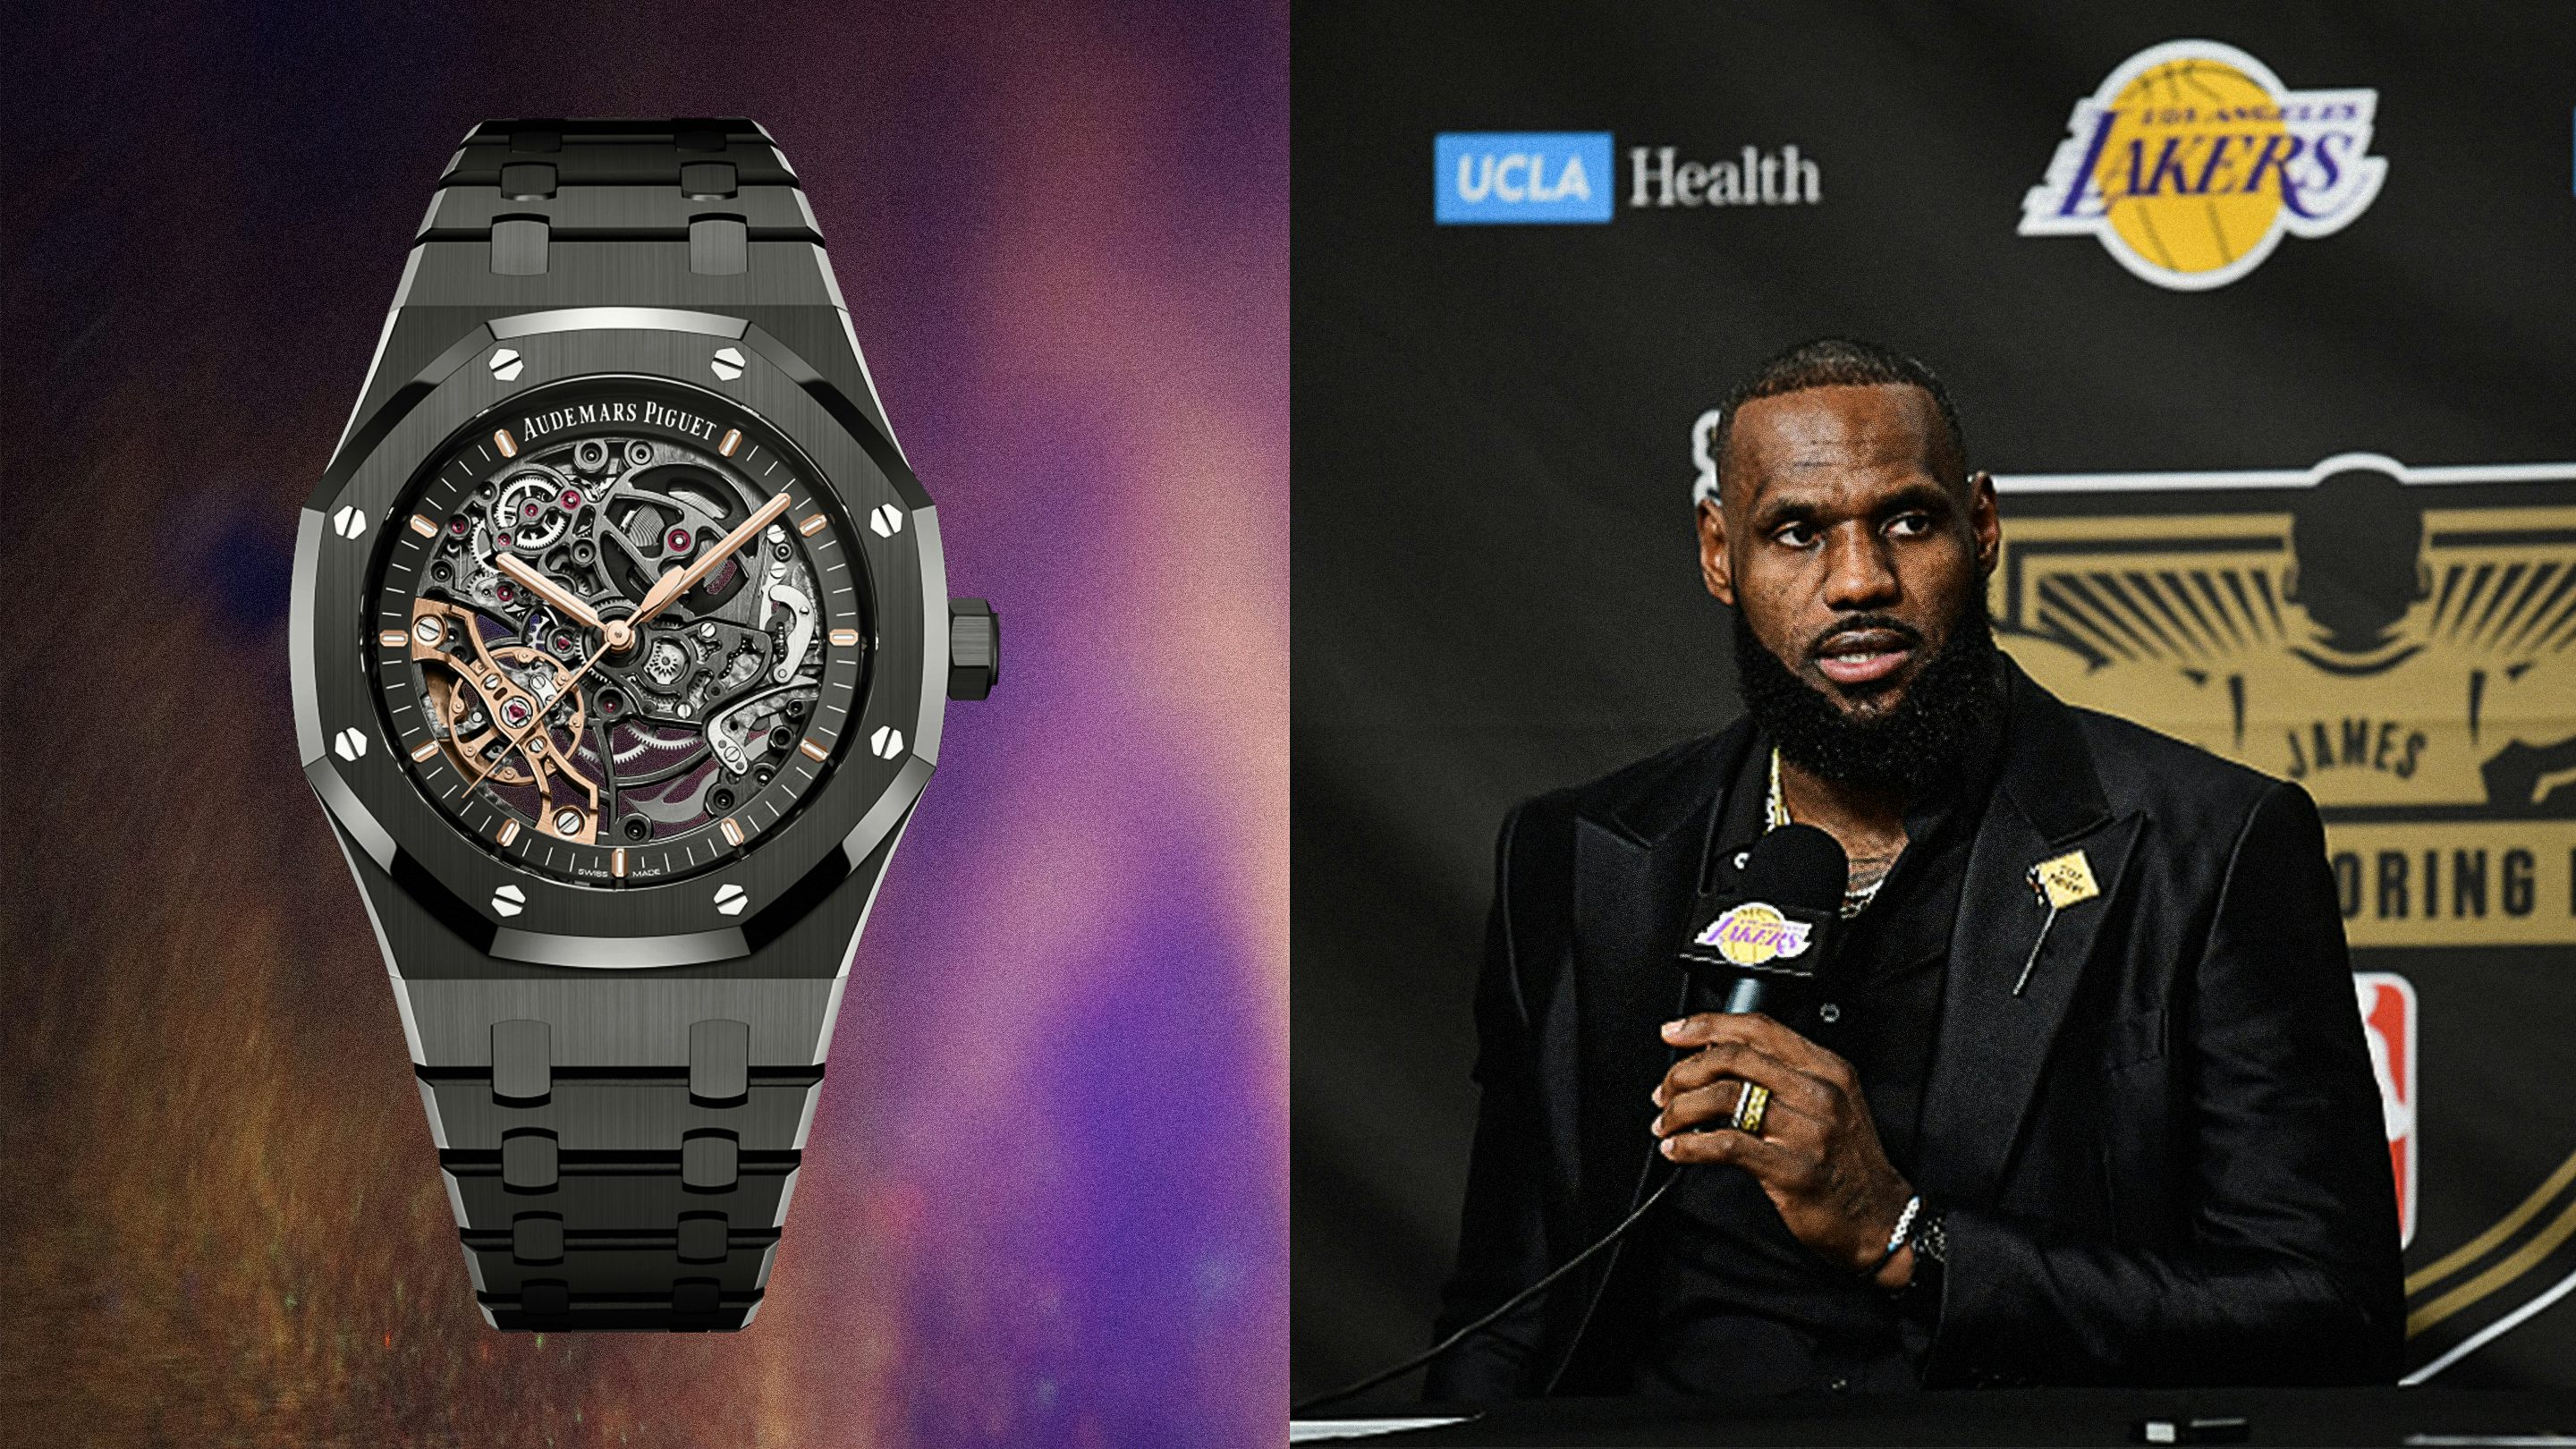 Lebron James and Lakers Branded Merchandise at the NBA Flagship